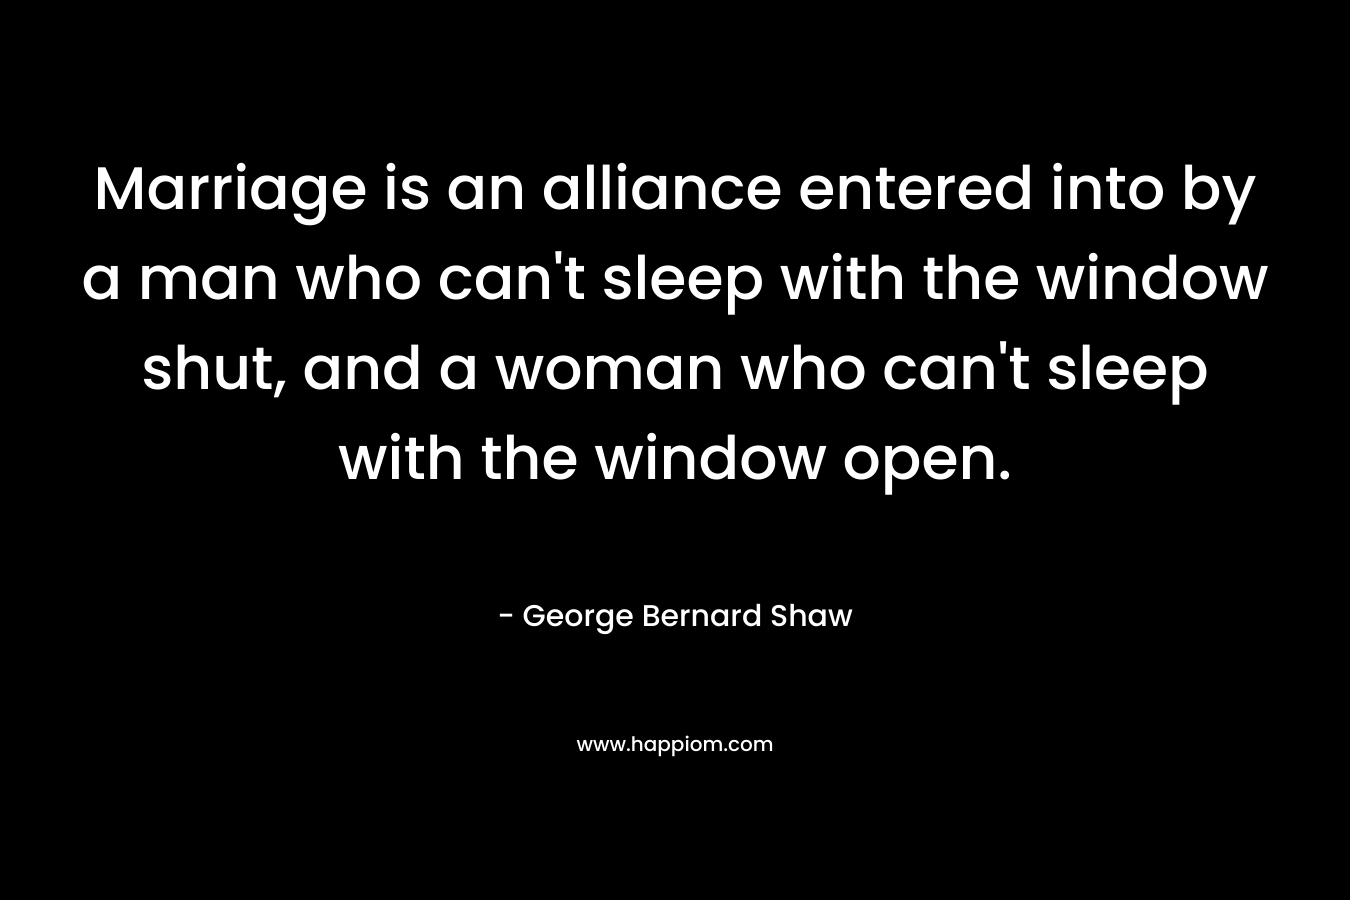 Marriage is an alliance entered into by a man who can't sleep with the window shut, and a woman who can't sleep with the window open.